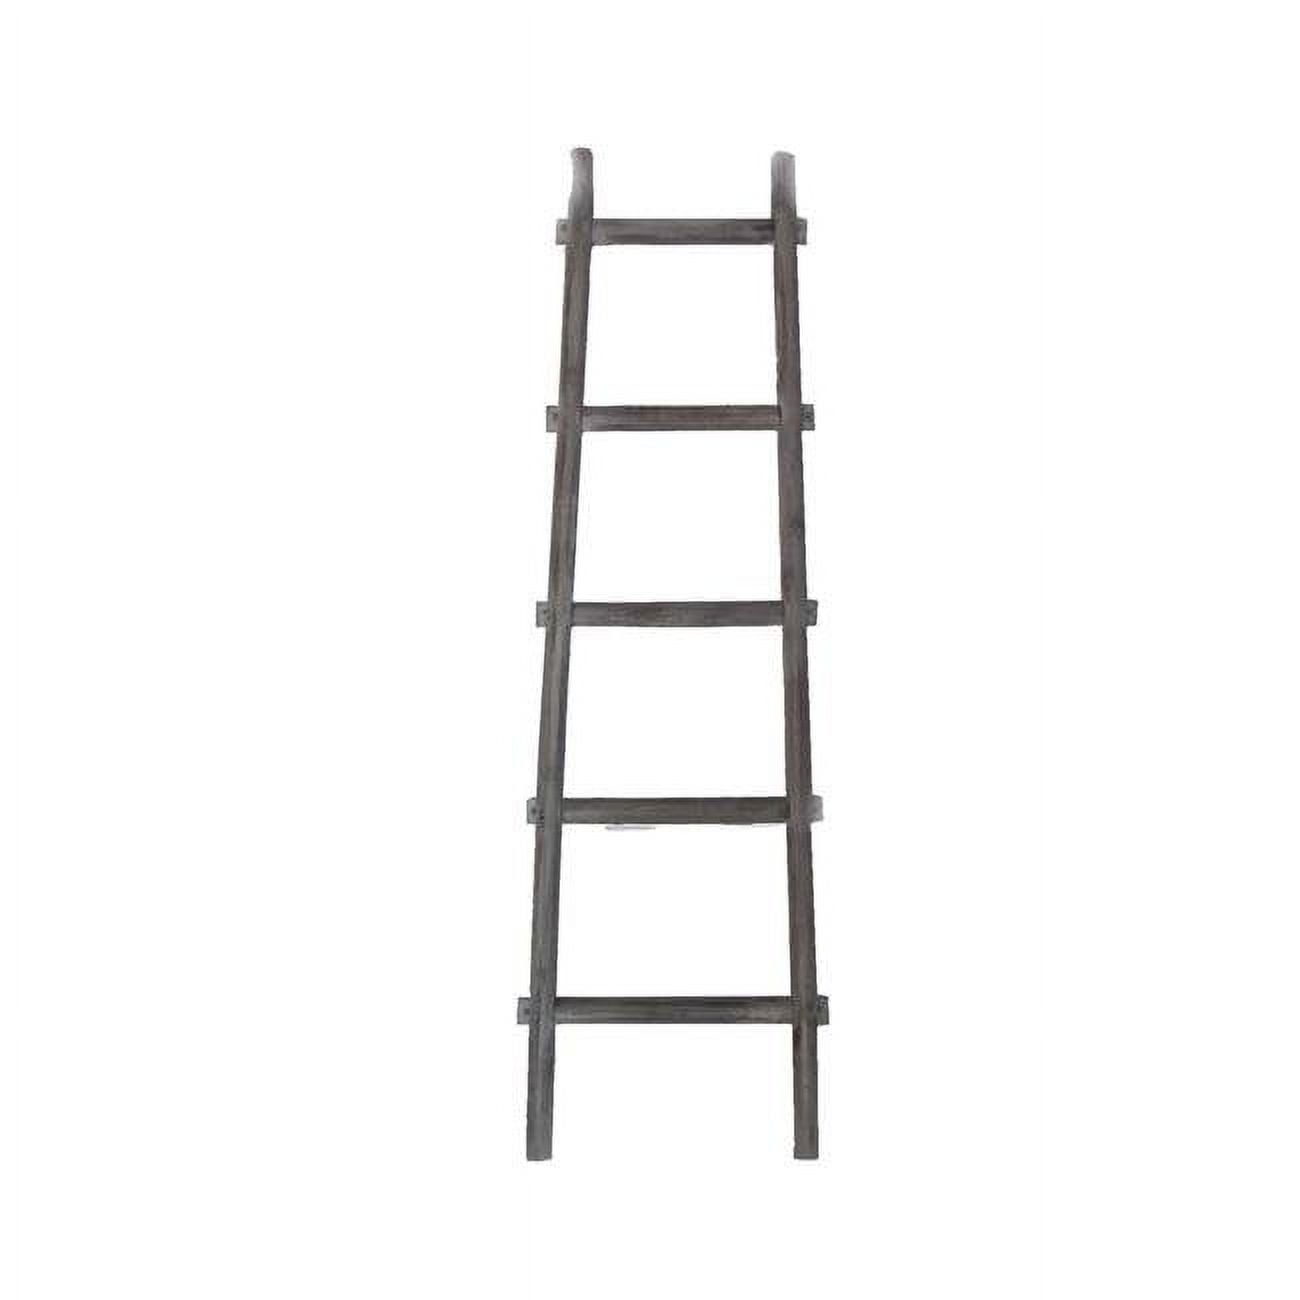 Bm210390 2 X 59 X 18 In. Transitional Style Wooden Decor Ladder With 5 Steps, Gray